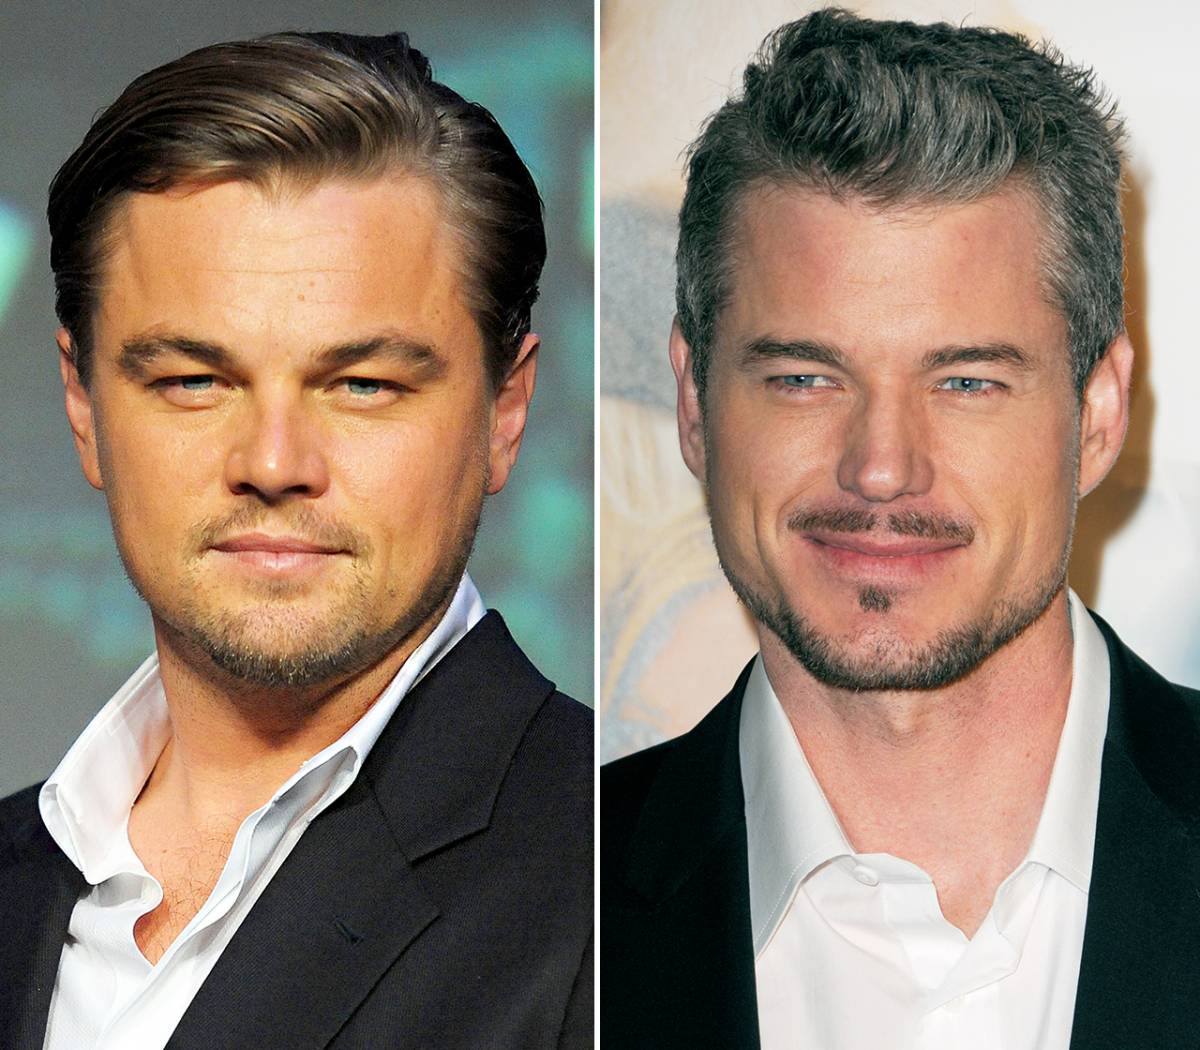 19 Celebs and Athletes With Uncanny Doppelgangers - Ftw Gallery